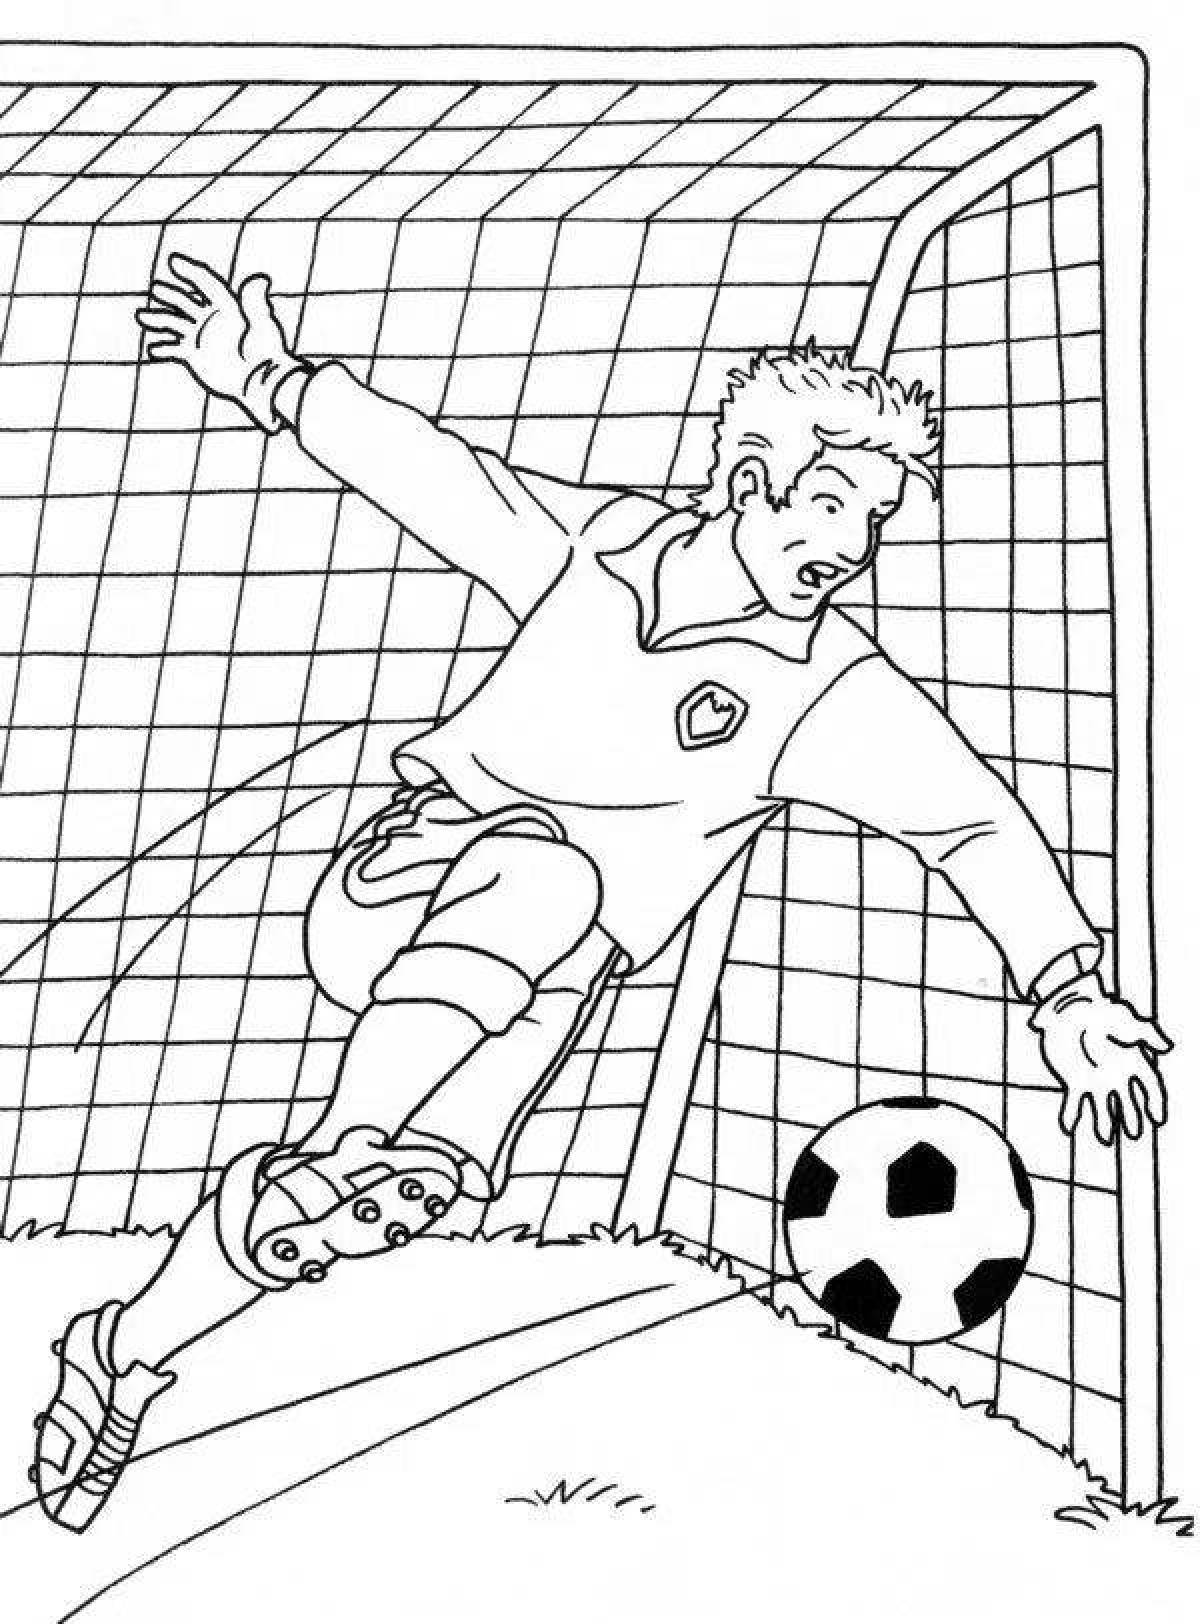 Coloring page happy football goalkeeper